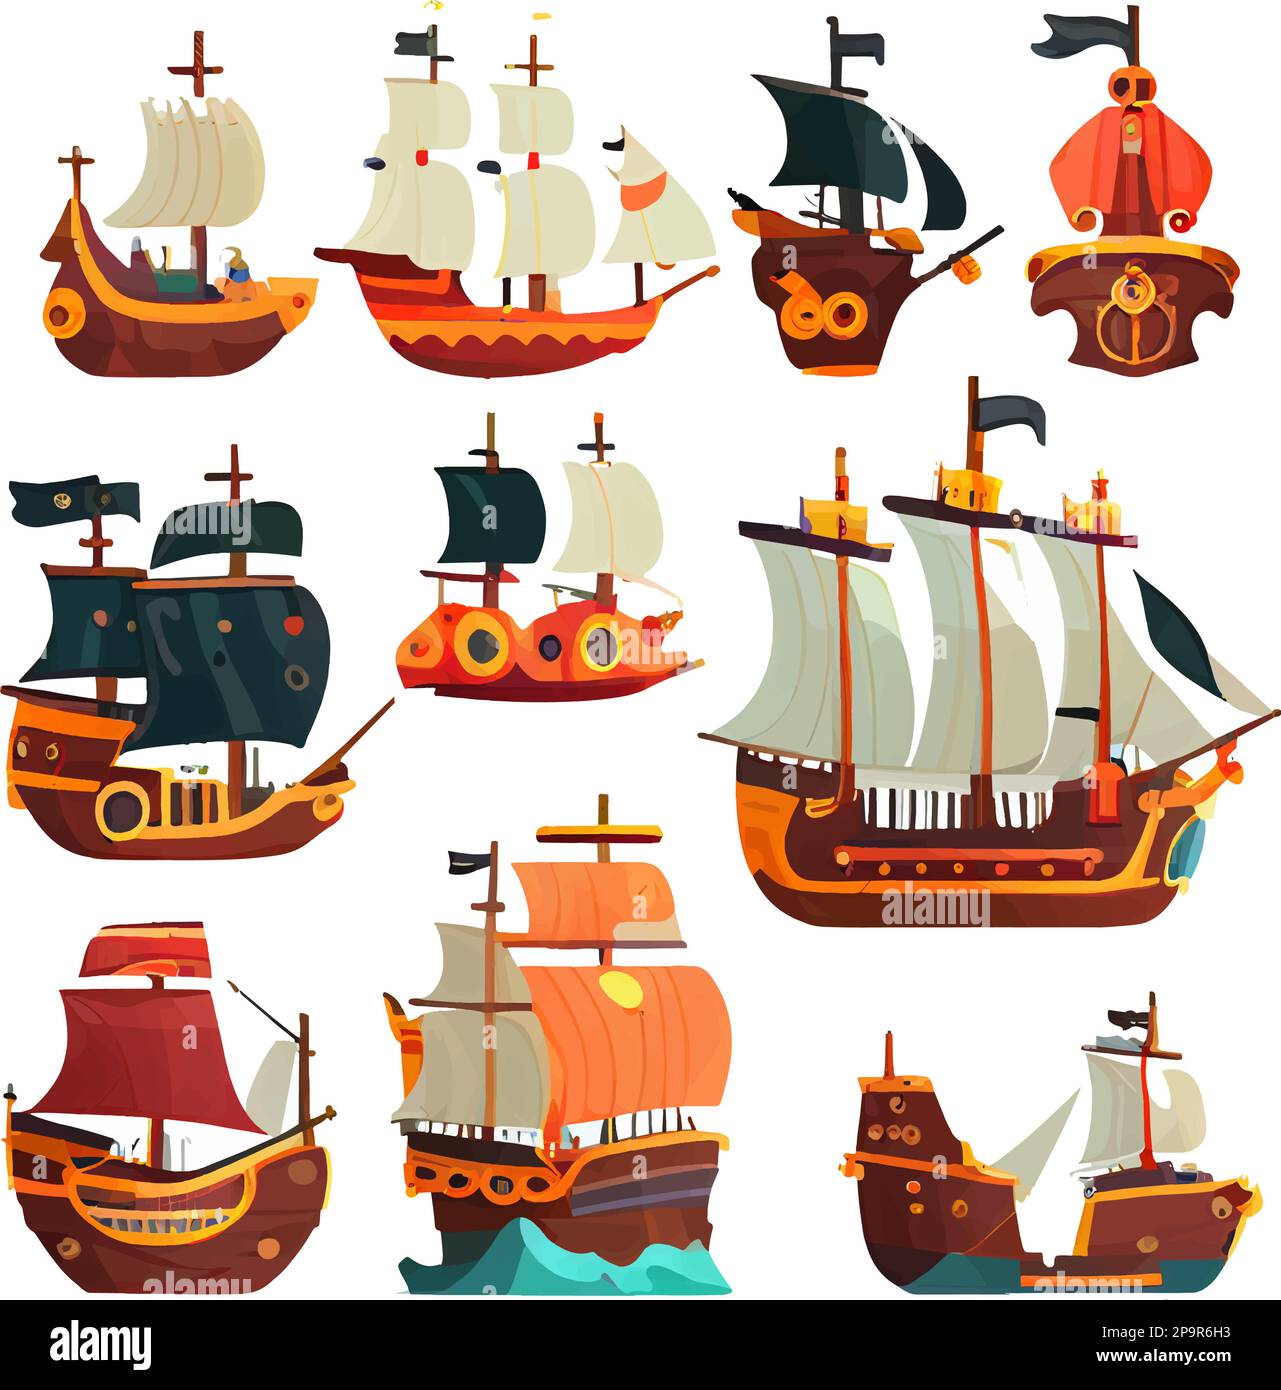 vector set illustration in cartoon style of vintage sailing ships Stock Vector